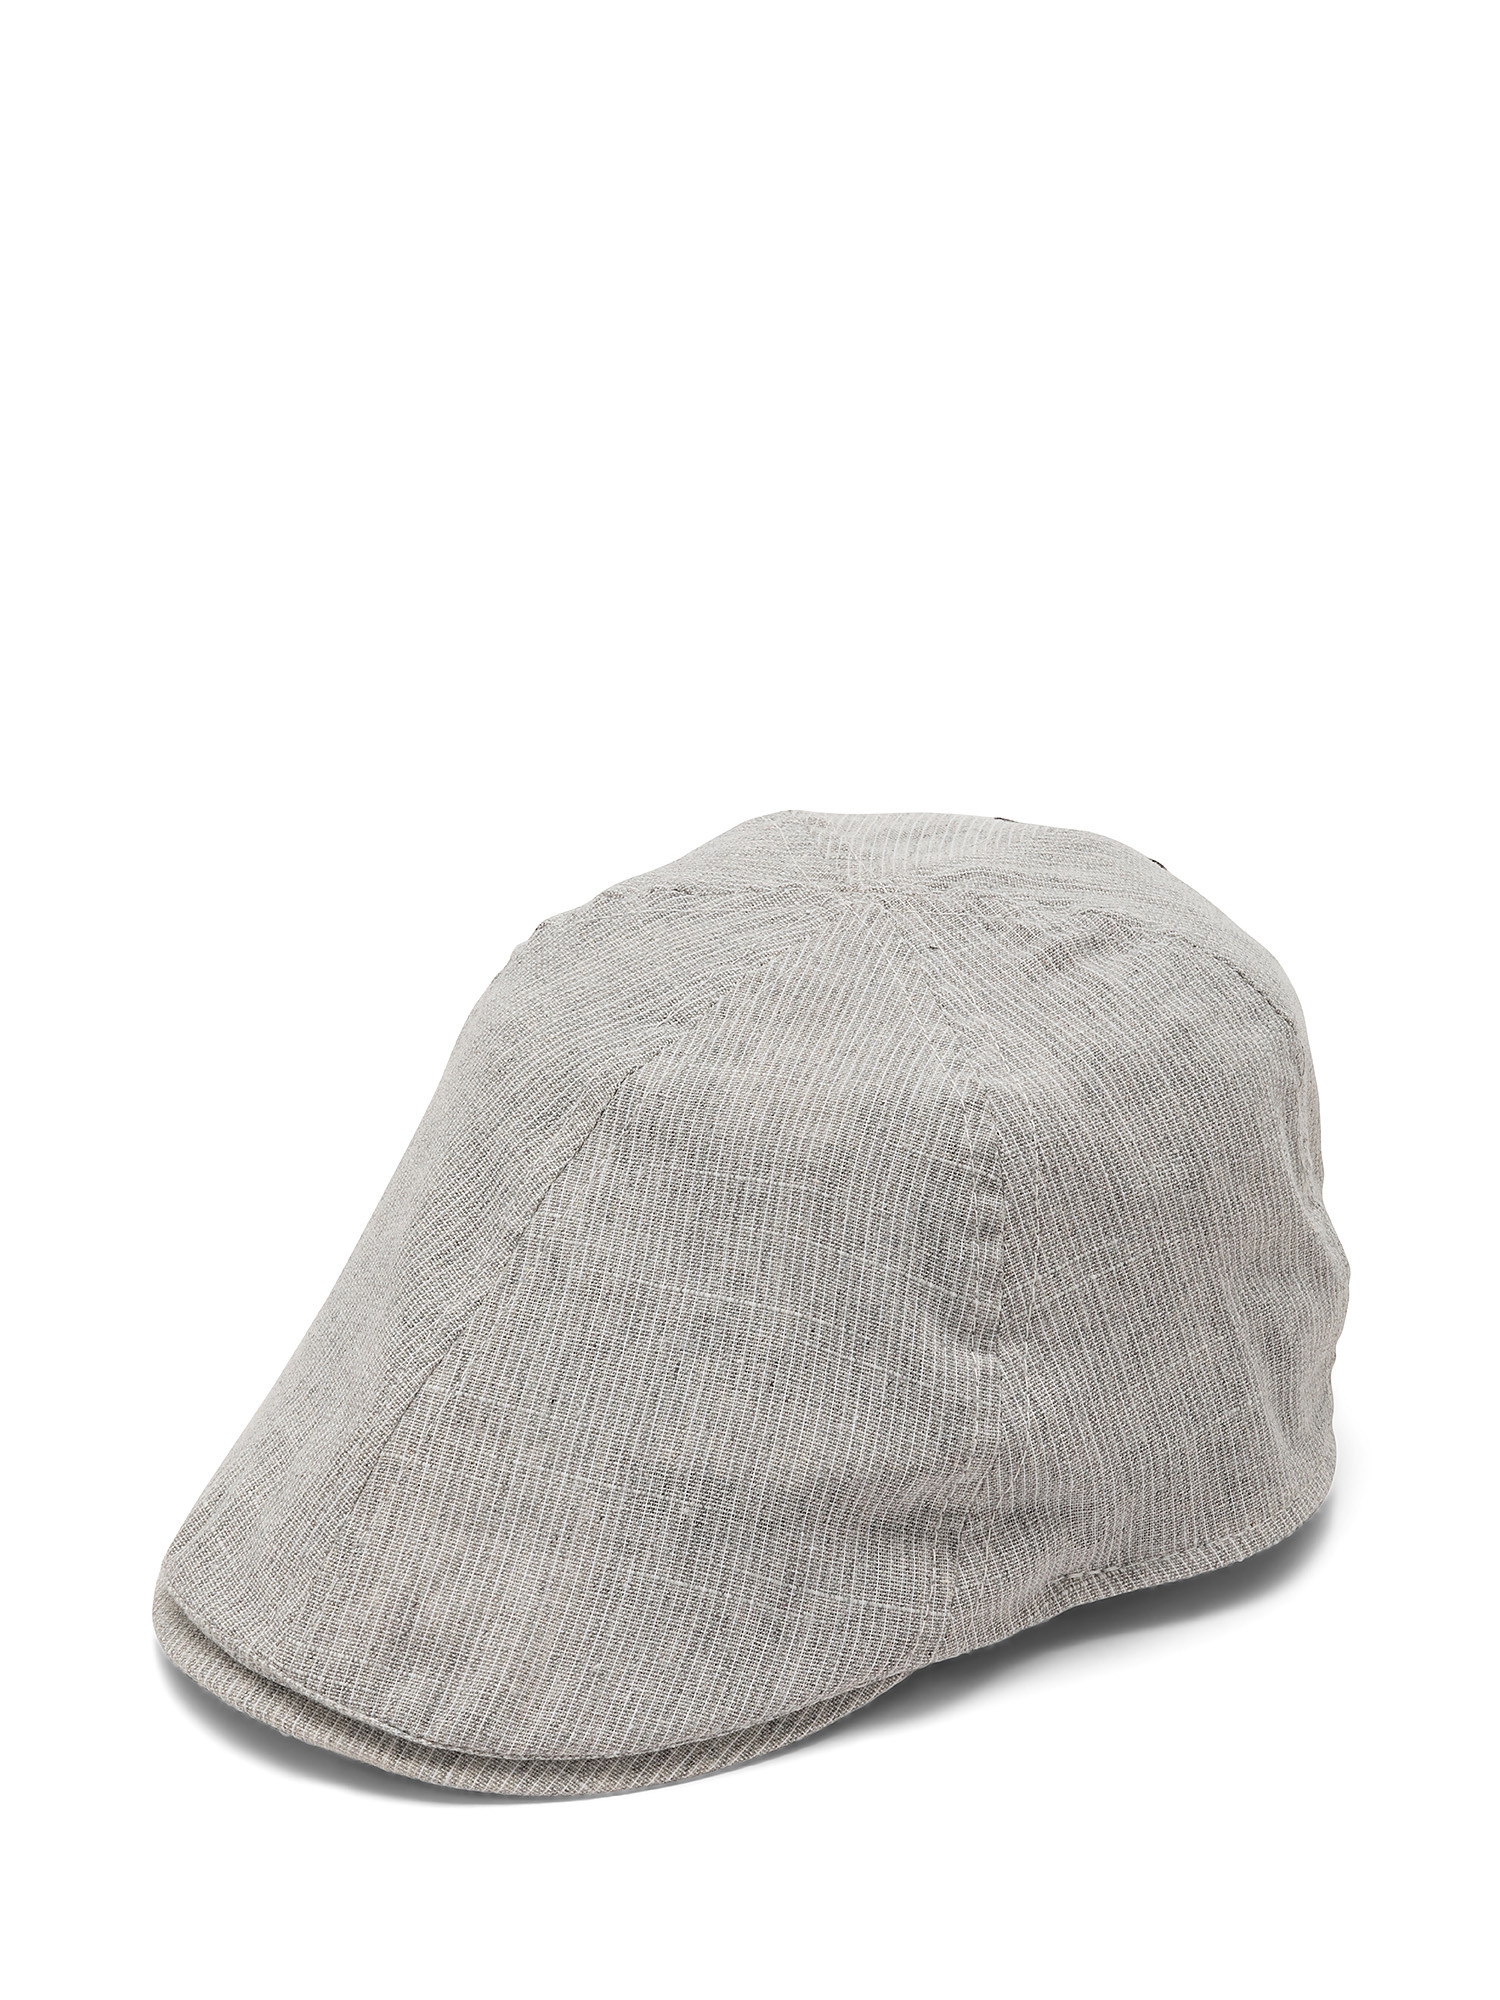 Cappello a righe, Grigio, large image number 0